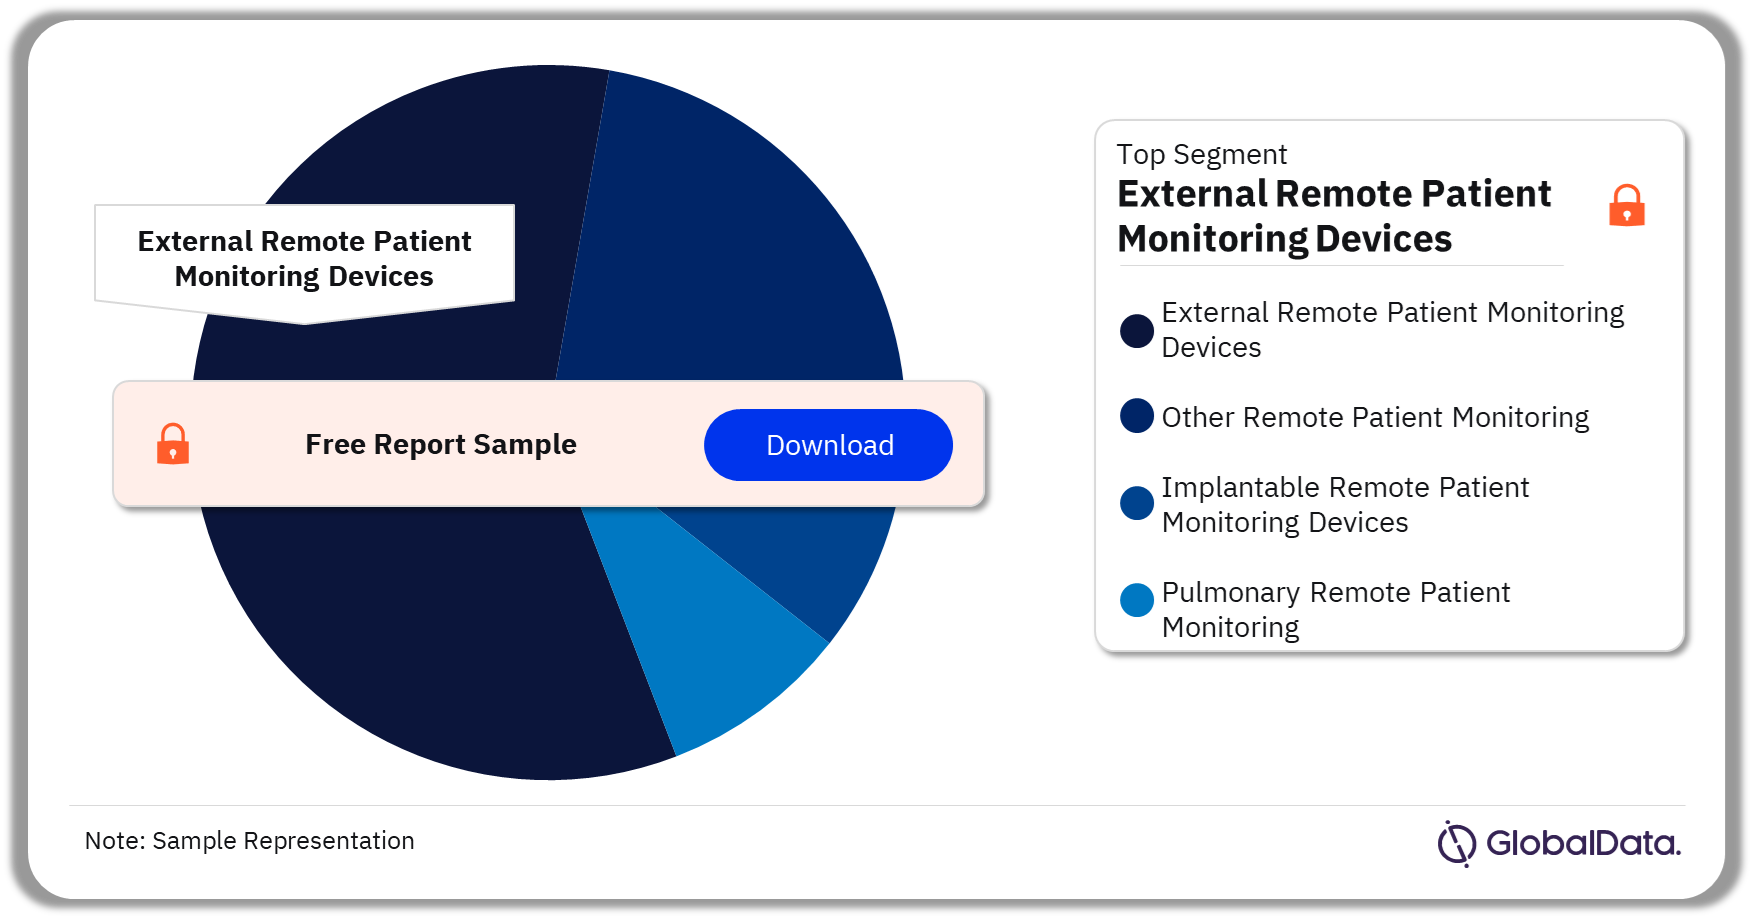 Remote Patient Monitoring Pipeline Market Analysis by Segments, 2023 (%)